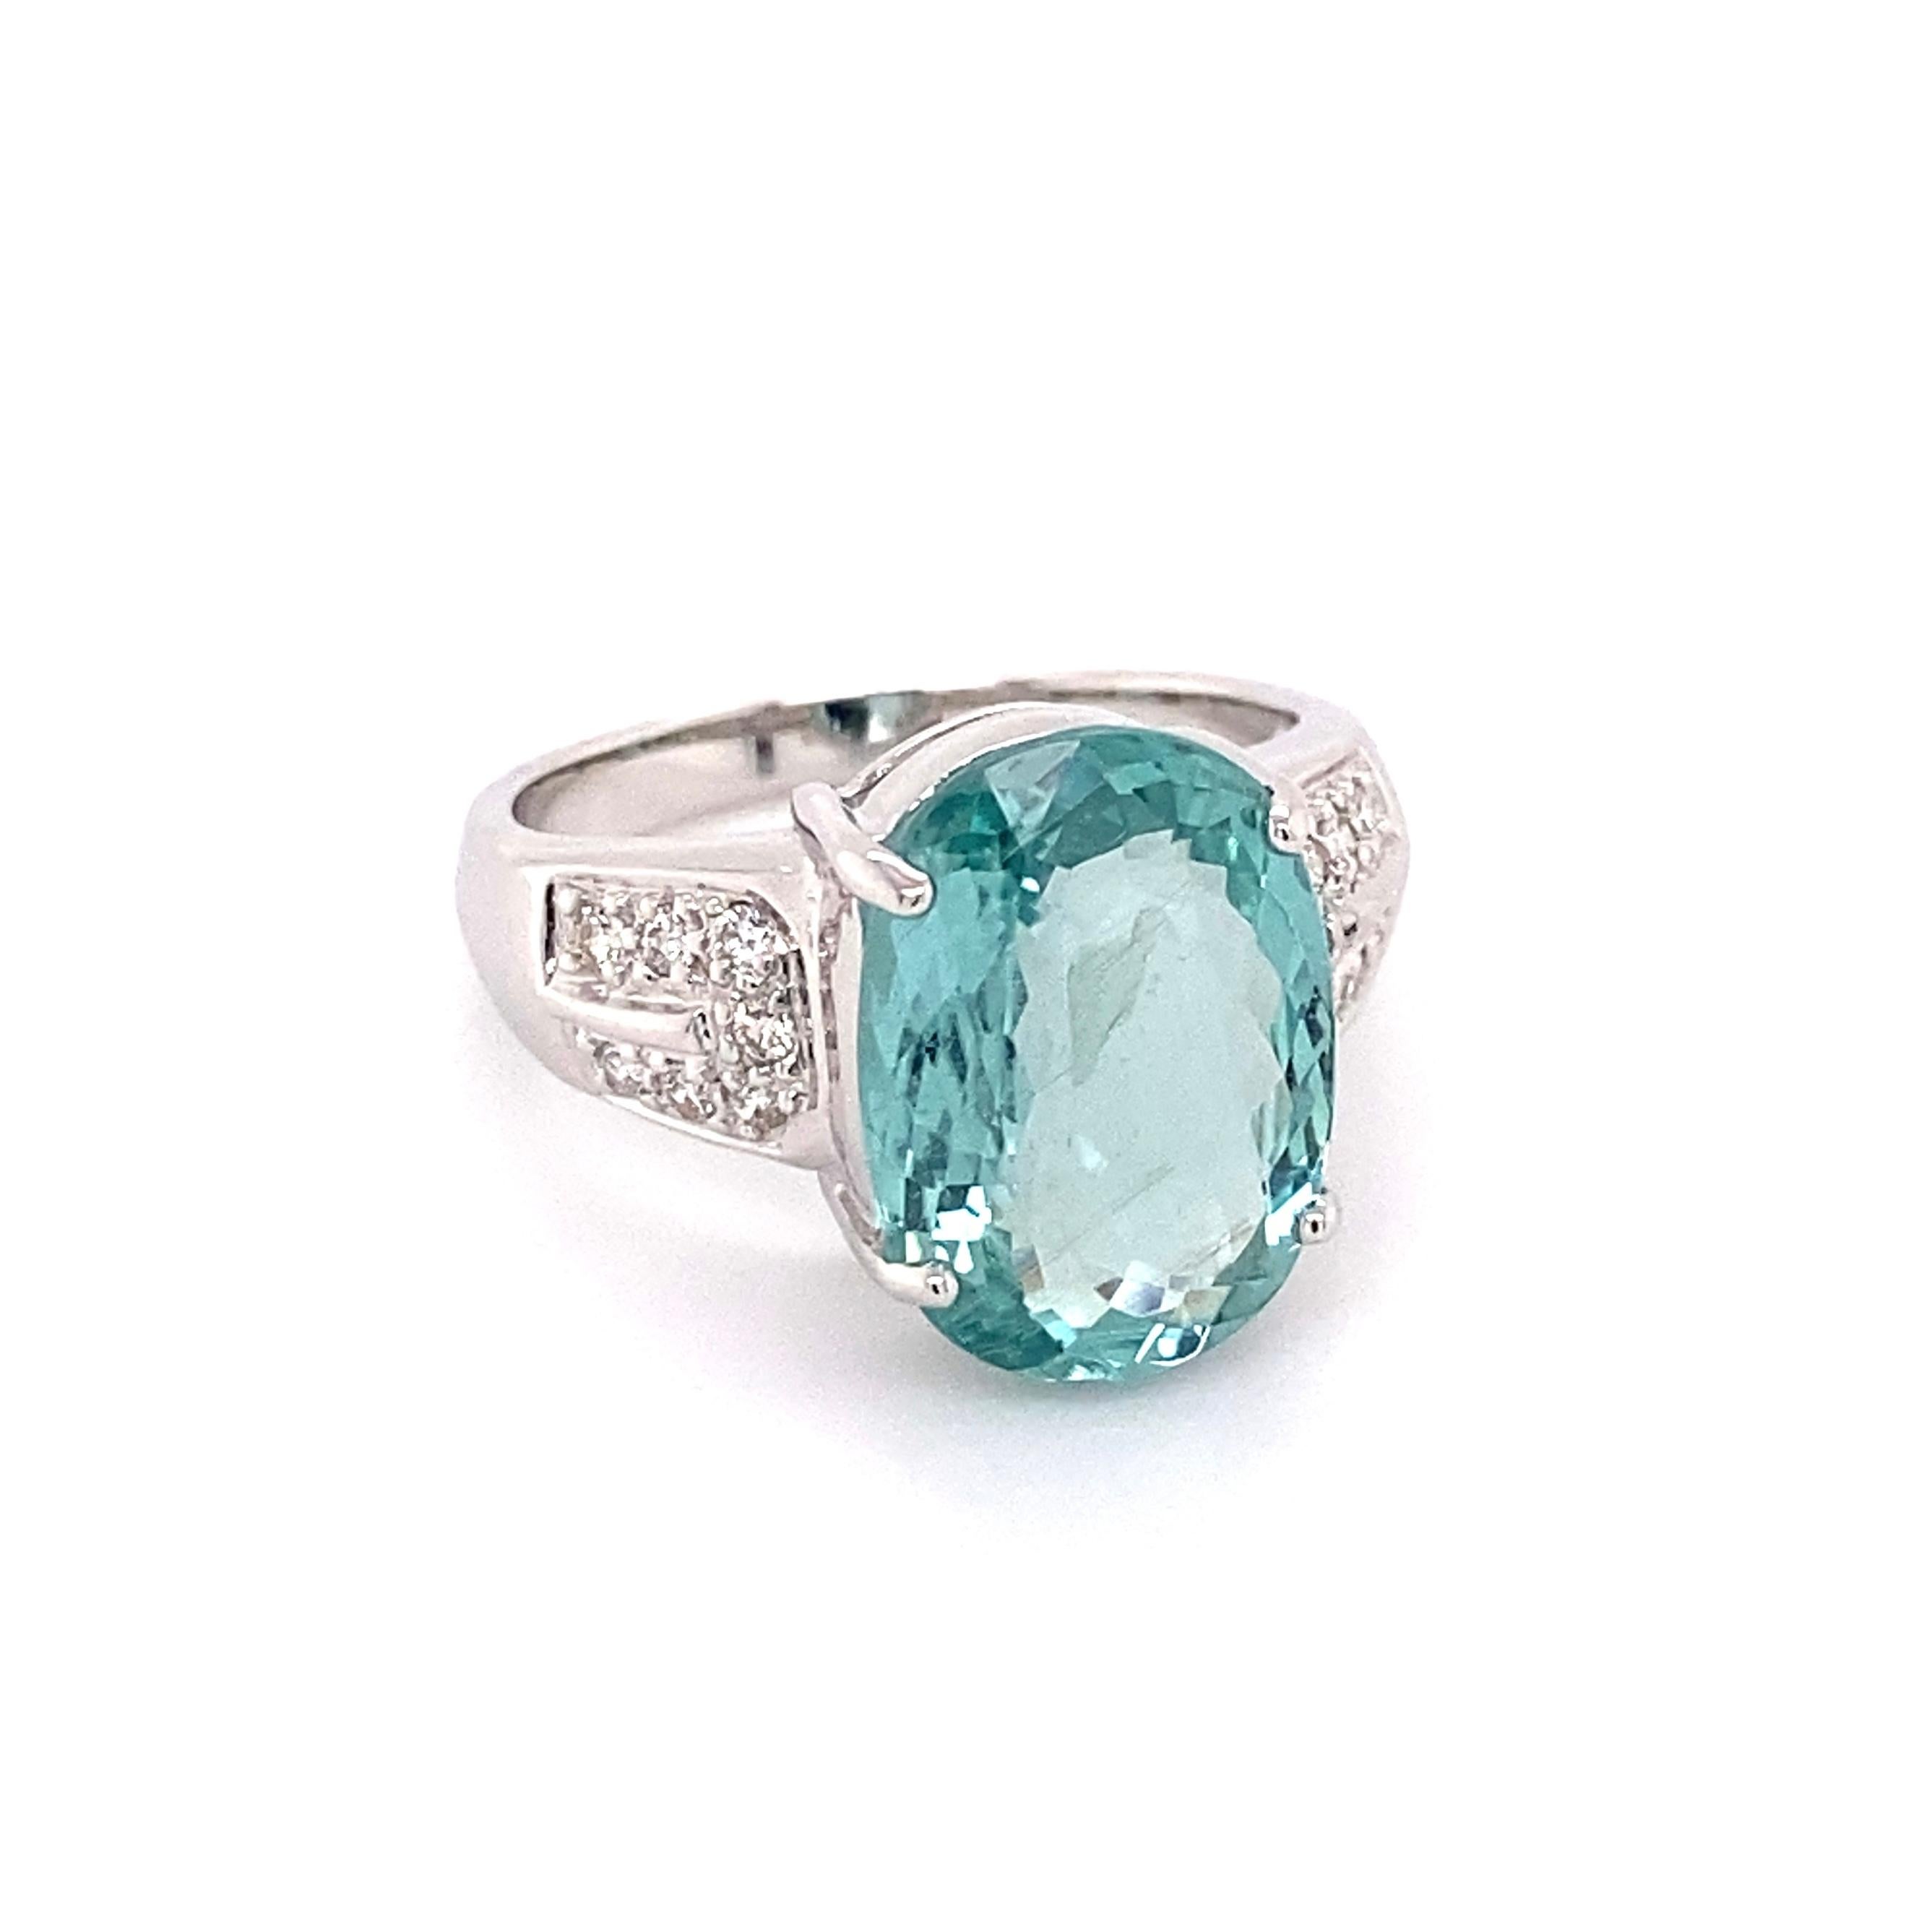 Simply Beautiful! Timeless and finely detailed Paraiba Tourmaline and Diamond Cocktail Ring, center securely nestled with a Hand set 5.01 Carat Oval Blue-Green Paraiba Tourmaline, 14.03 x 10.06 x 4.88 mm and Diamonds, weighing approx. 0.18tcw